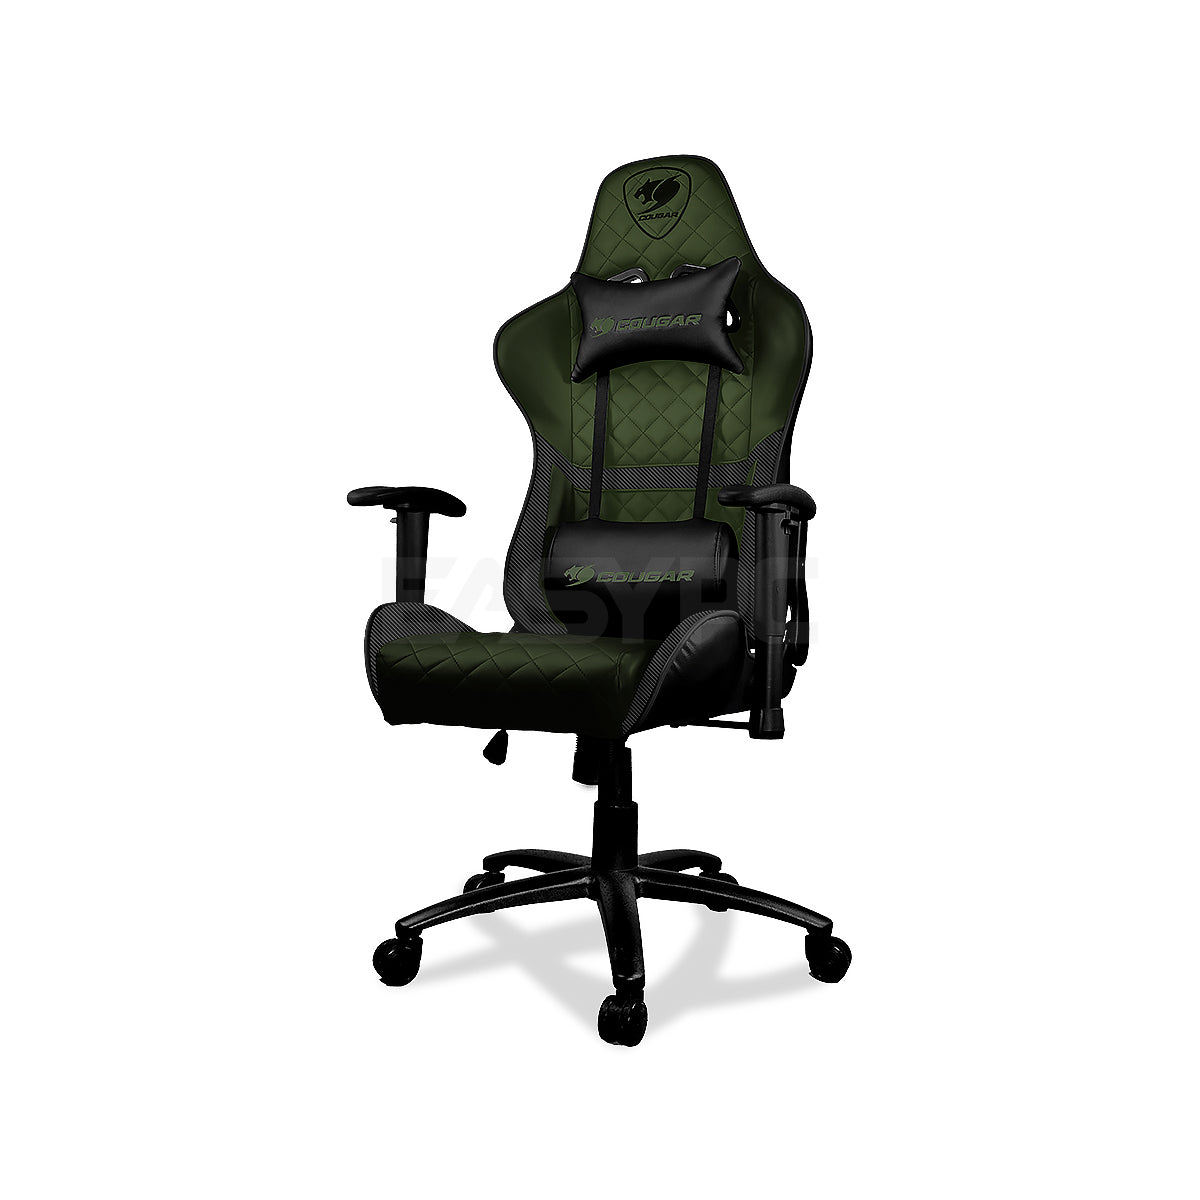 Cougar Armor One Gaming Chair Black Army Green-a